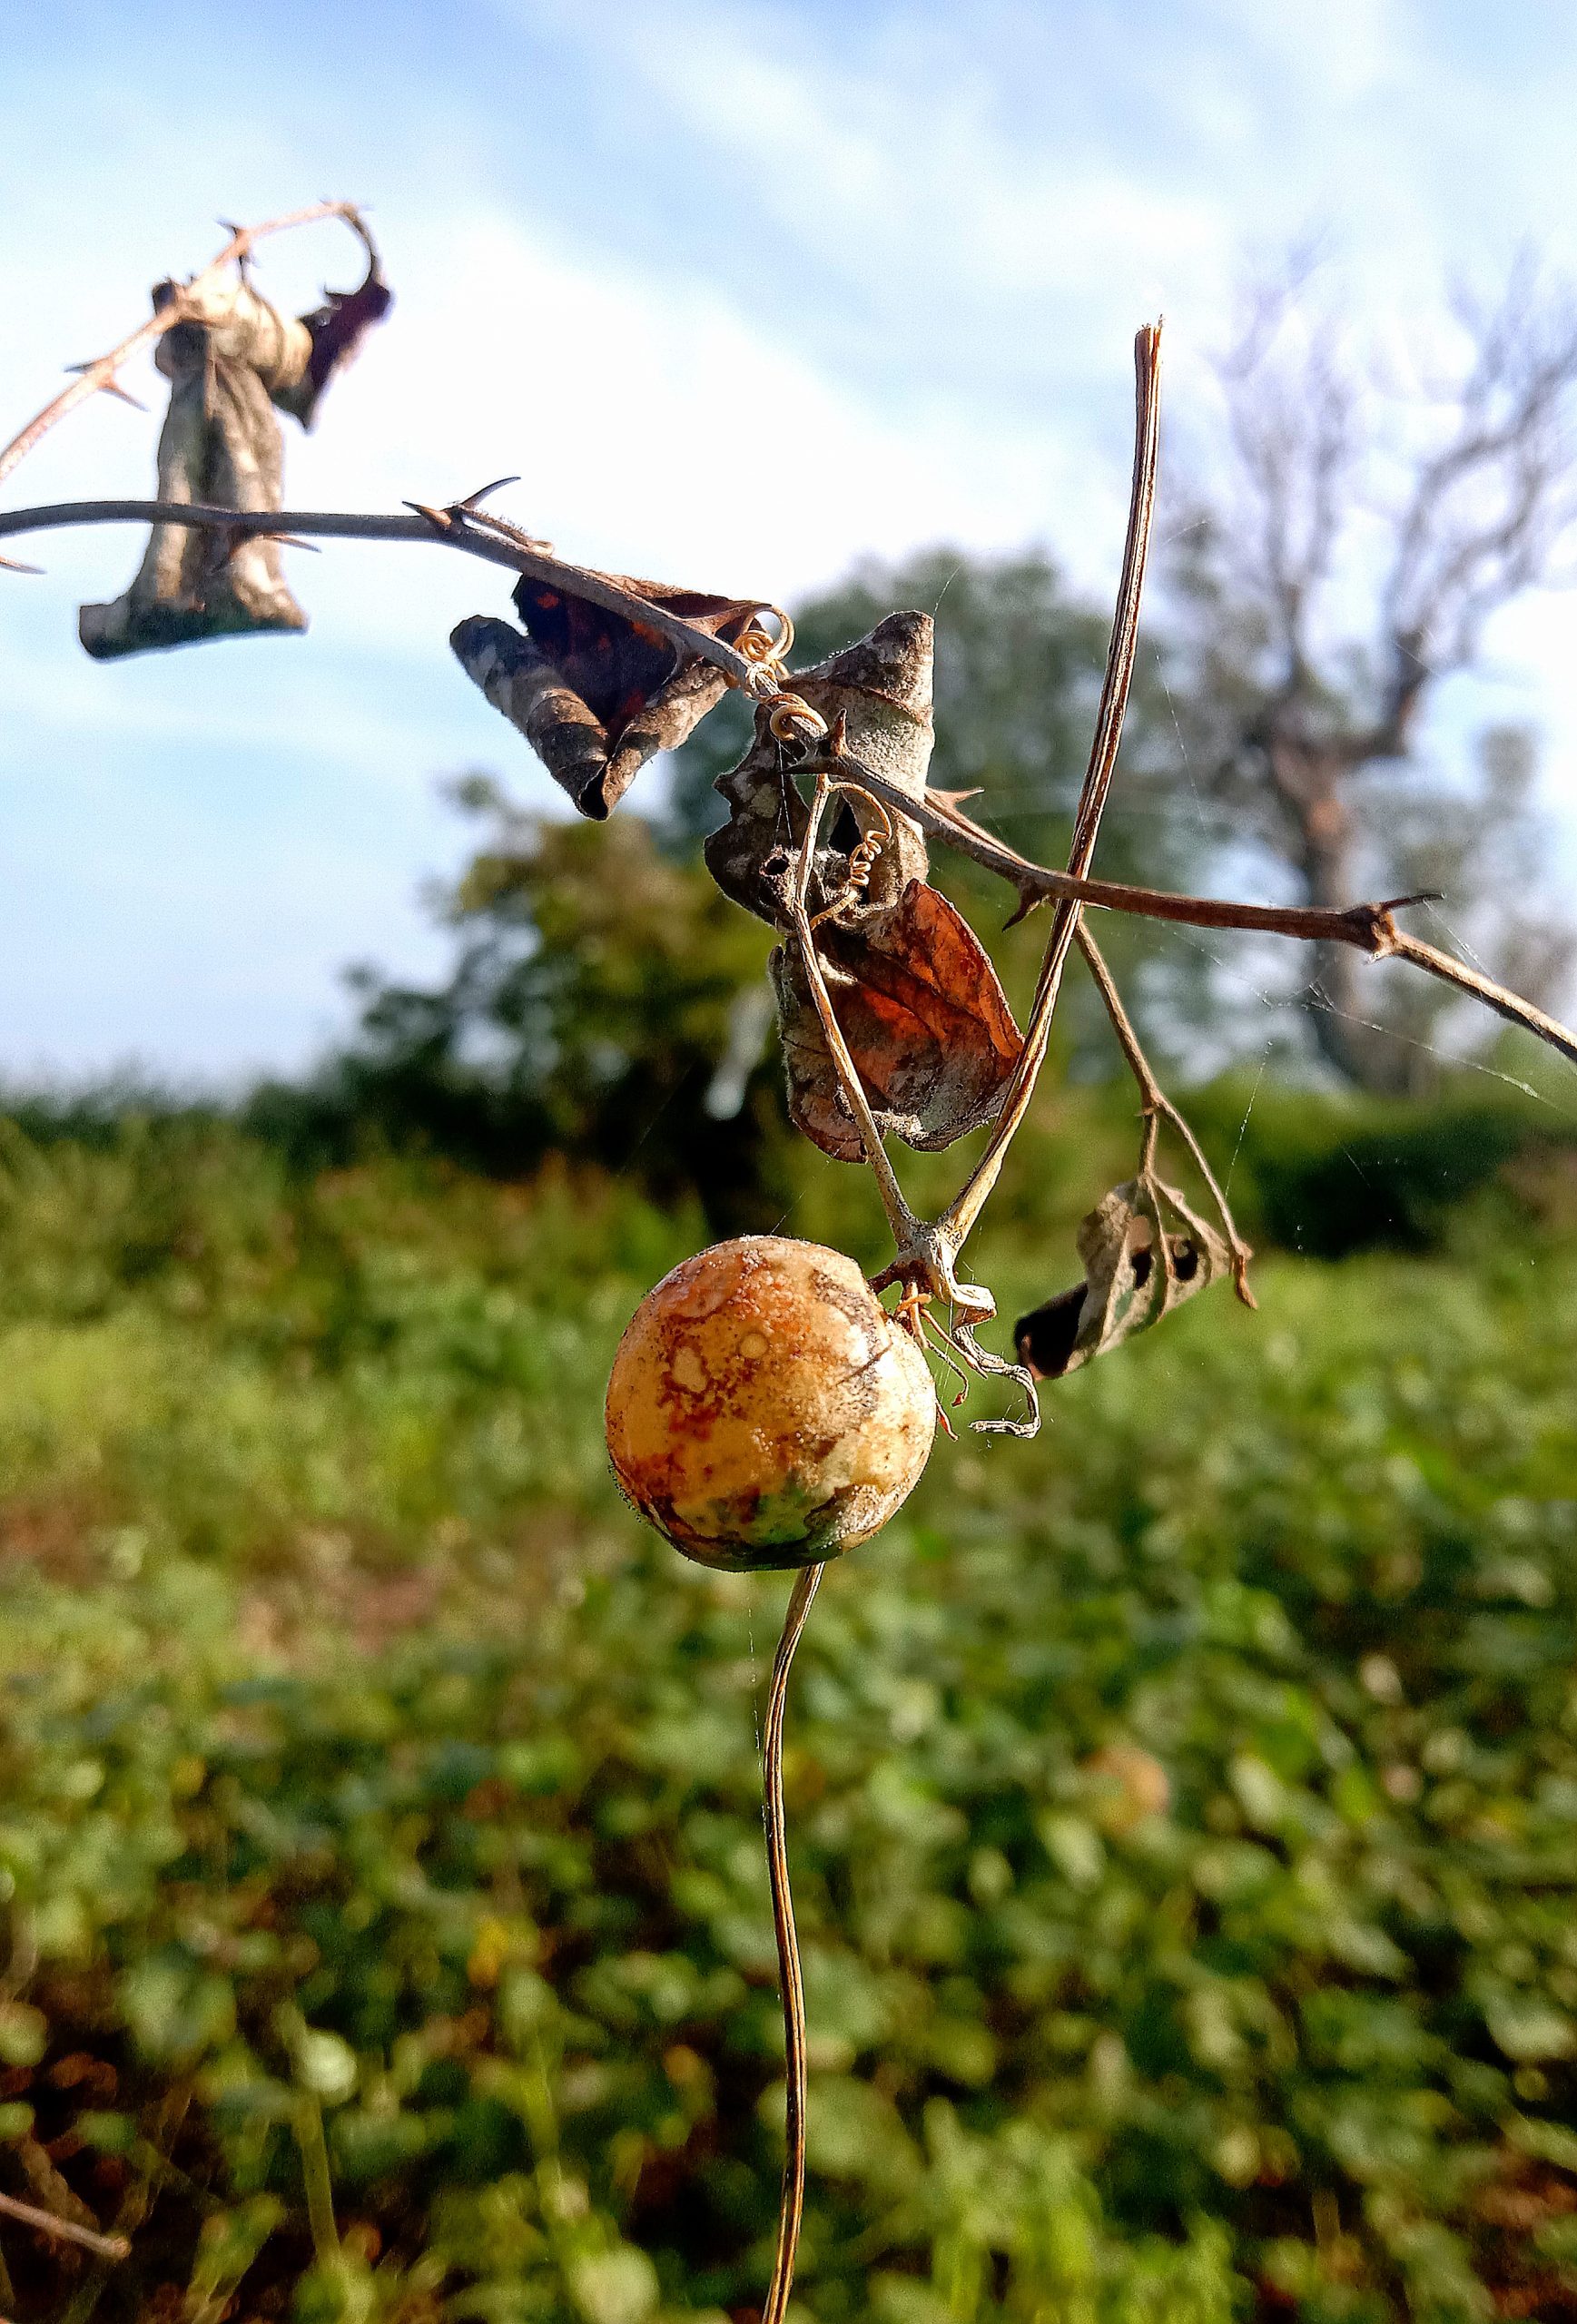 A fruit on a dry plant